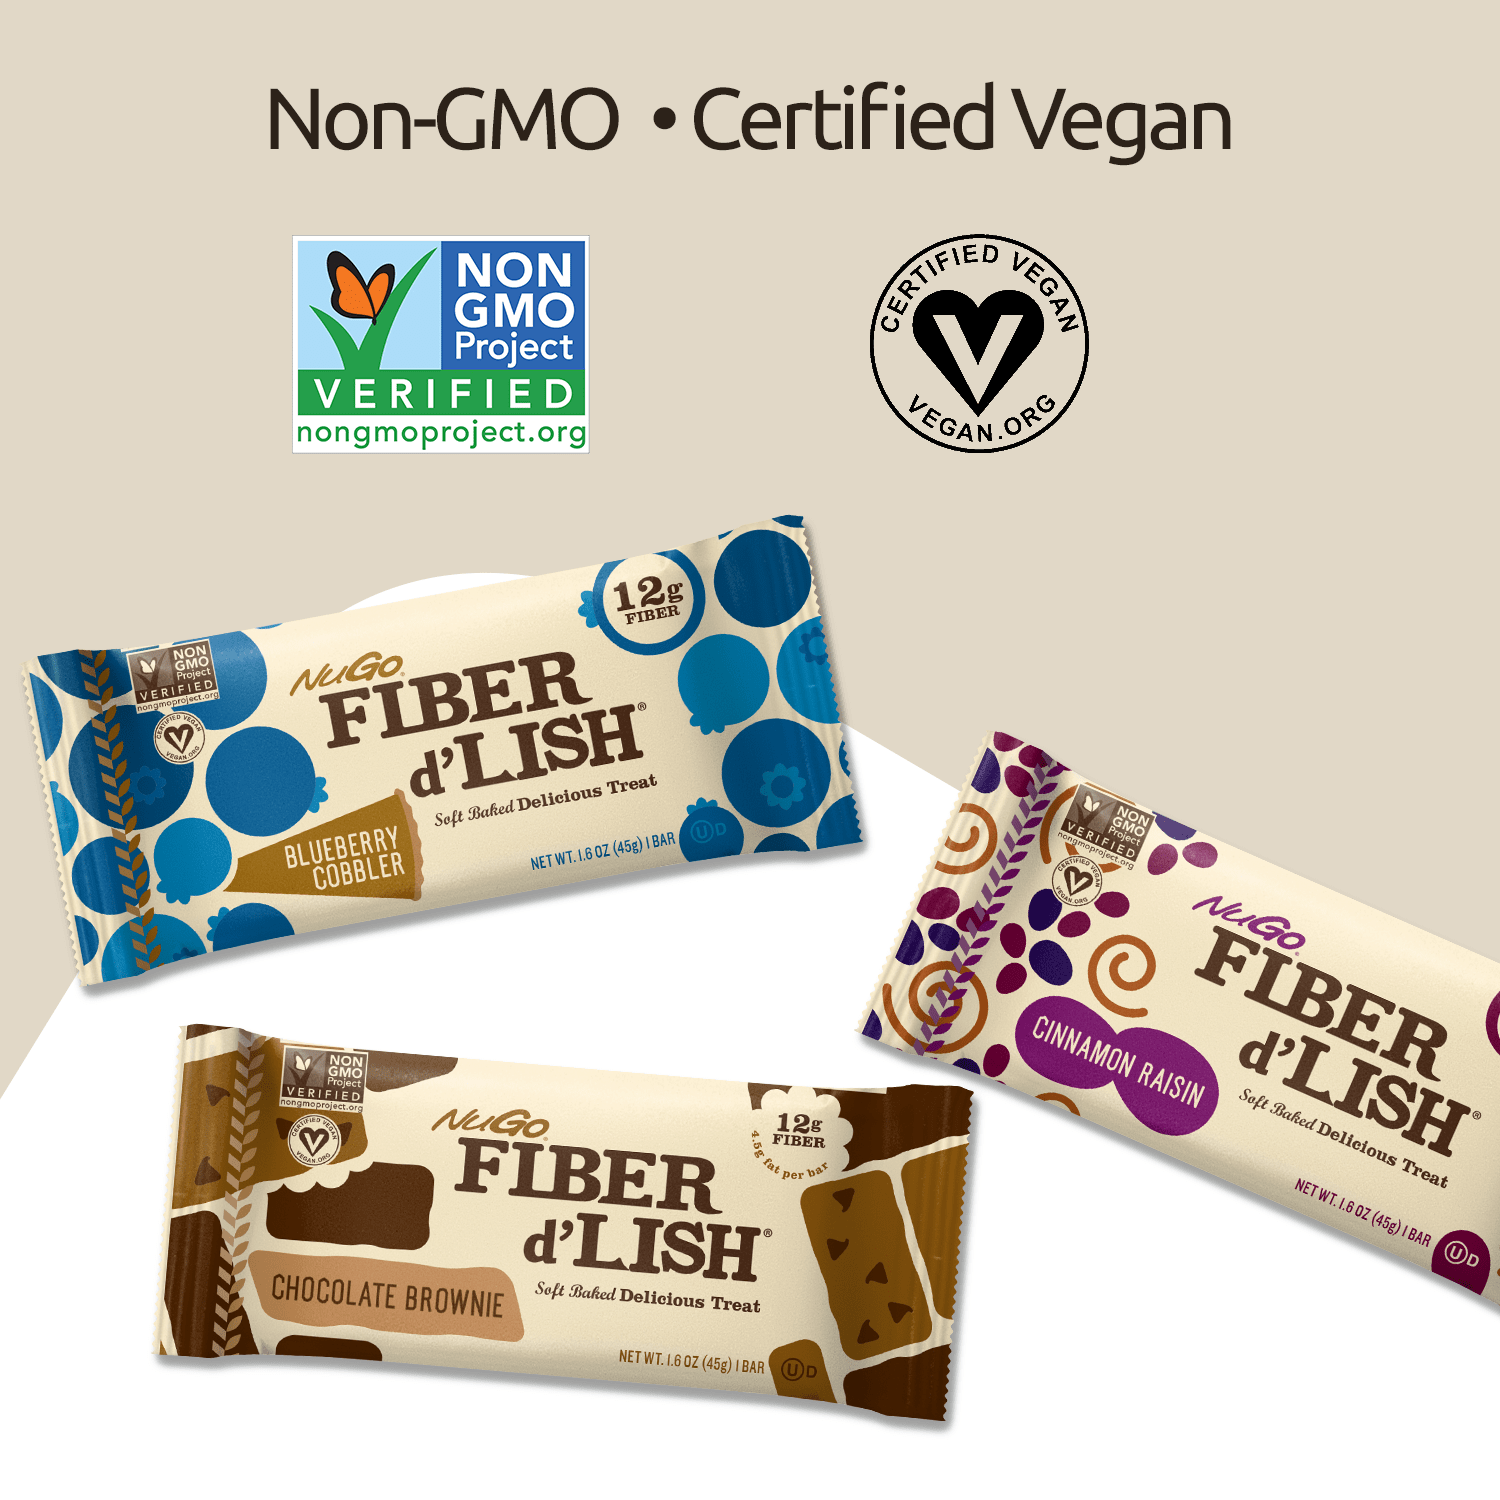 Non-GMO and Certified Vegan Text Image